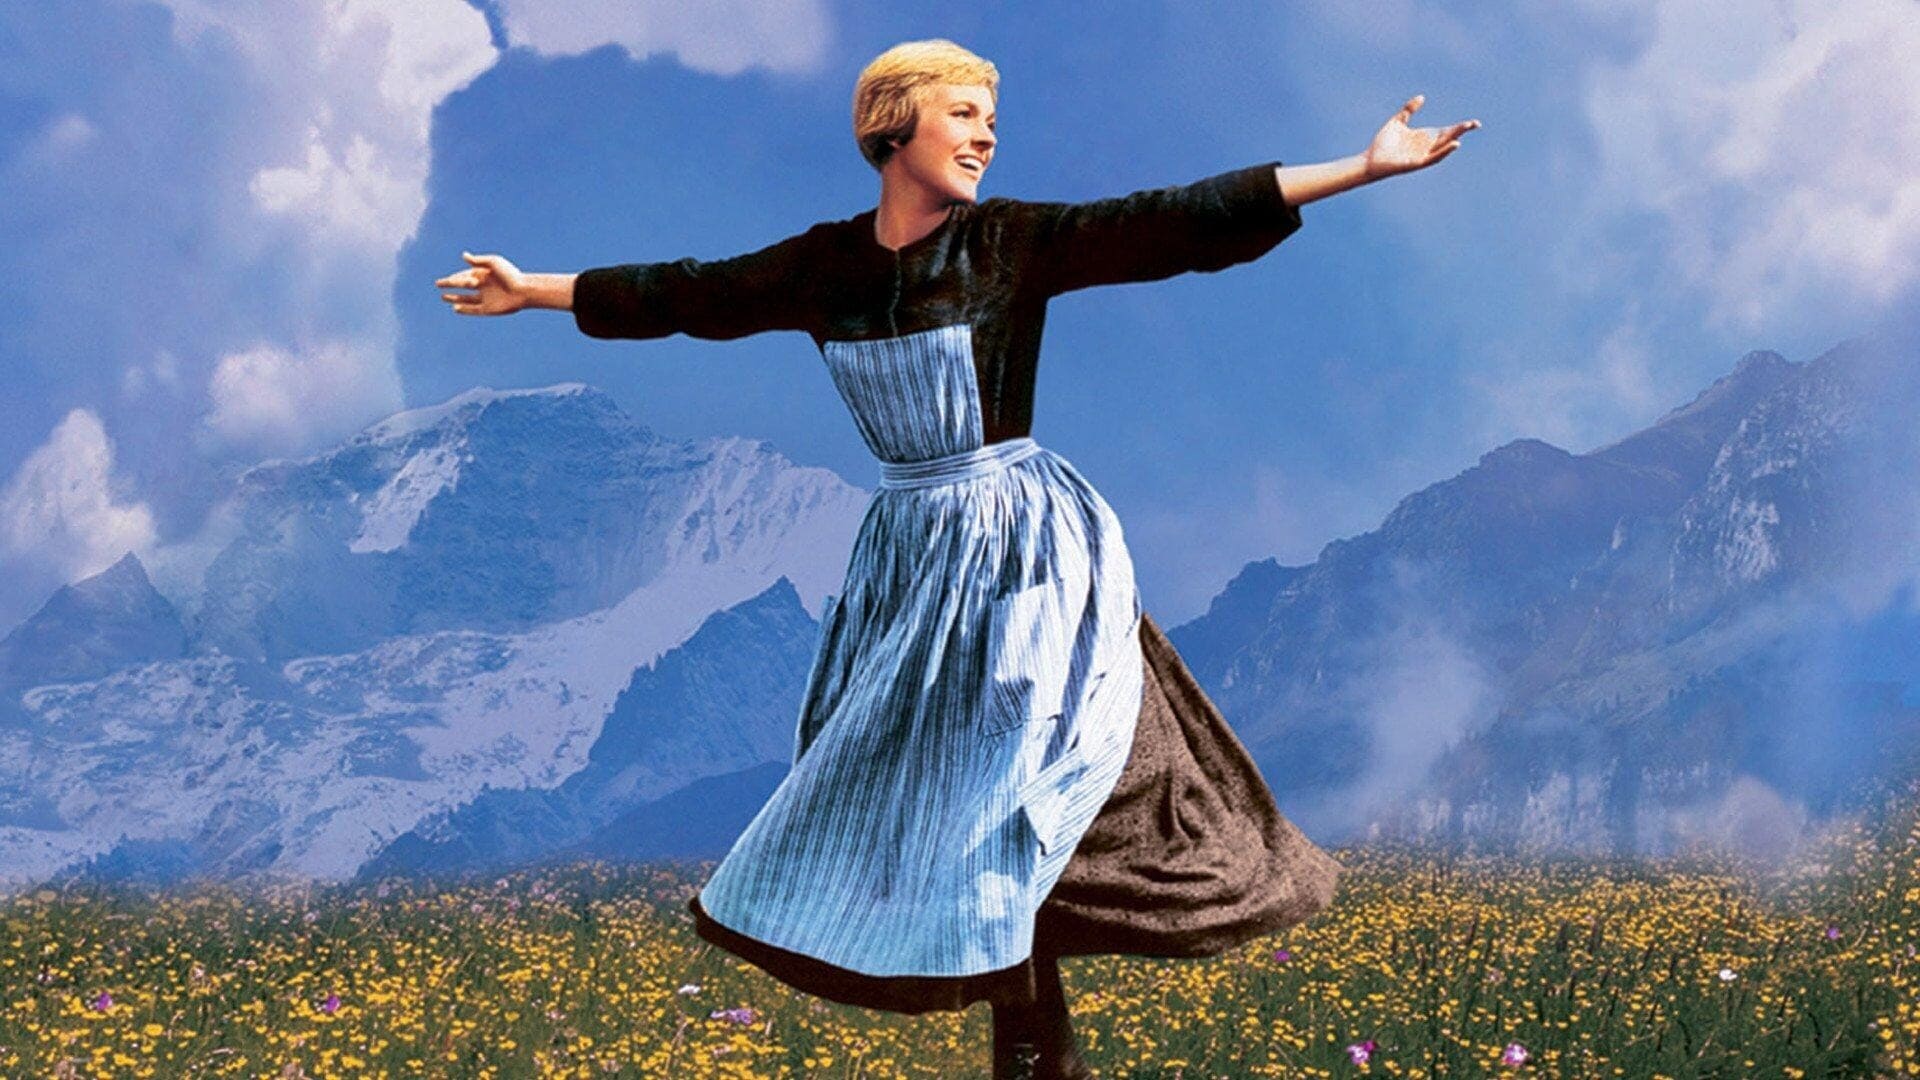 The Sound Of Music Movie Free Online Download